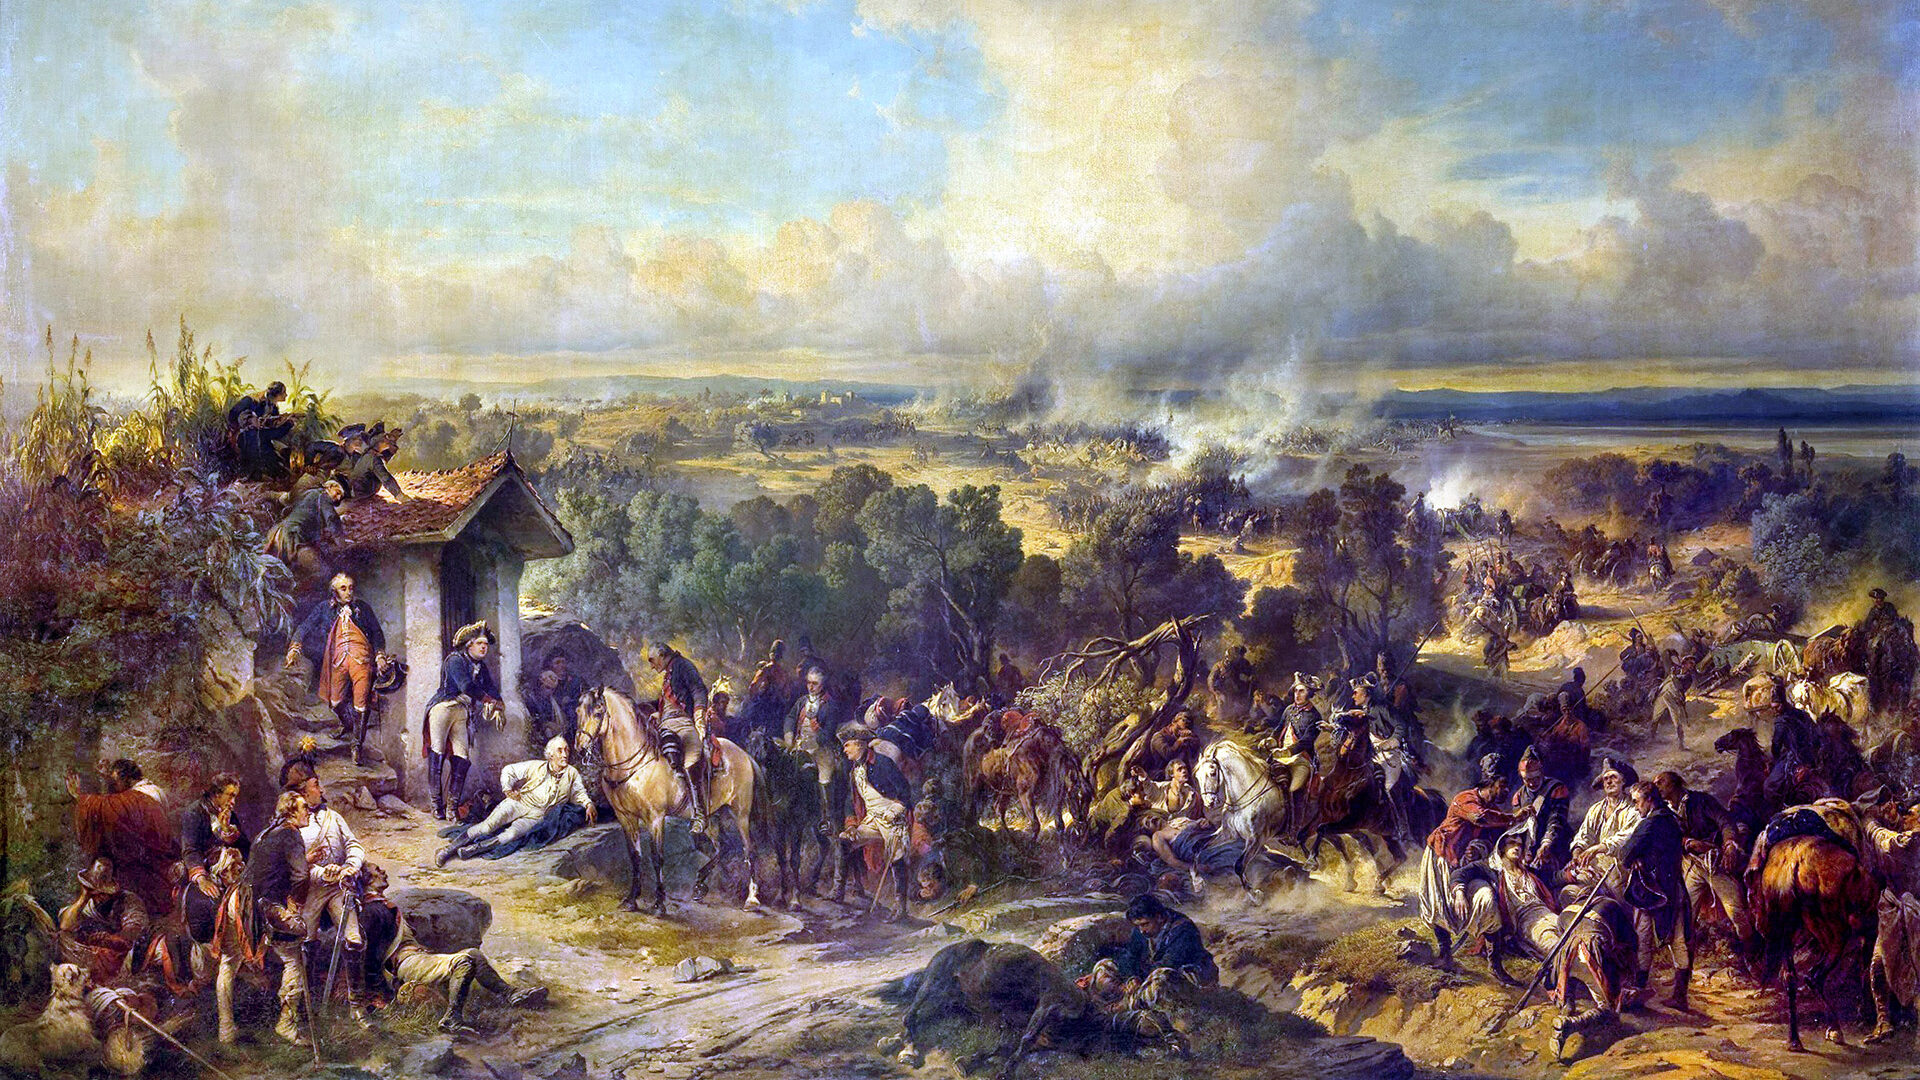 Following a rapid countermarch, Suvorov’s Austro-Russian army smashed France's Army of Naples on the banks of the Trebbia River in June, thereby preventing it from reinforcing the beleaguered French forces in Genoa.